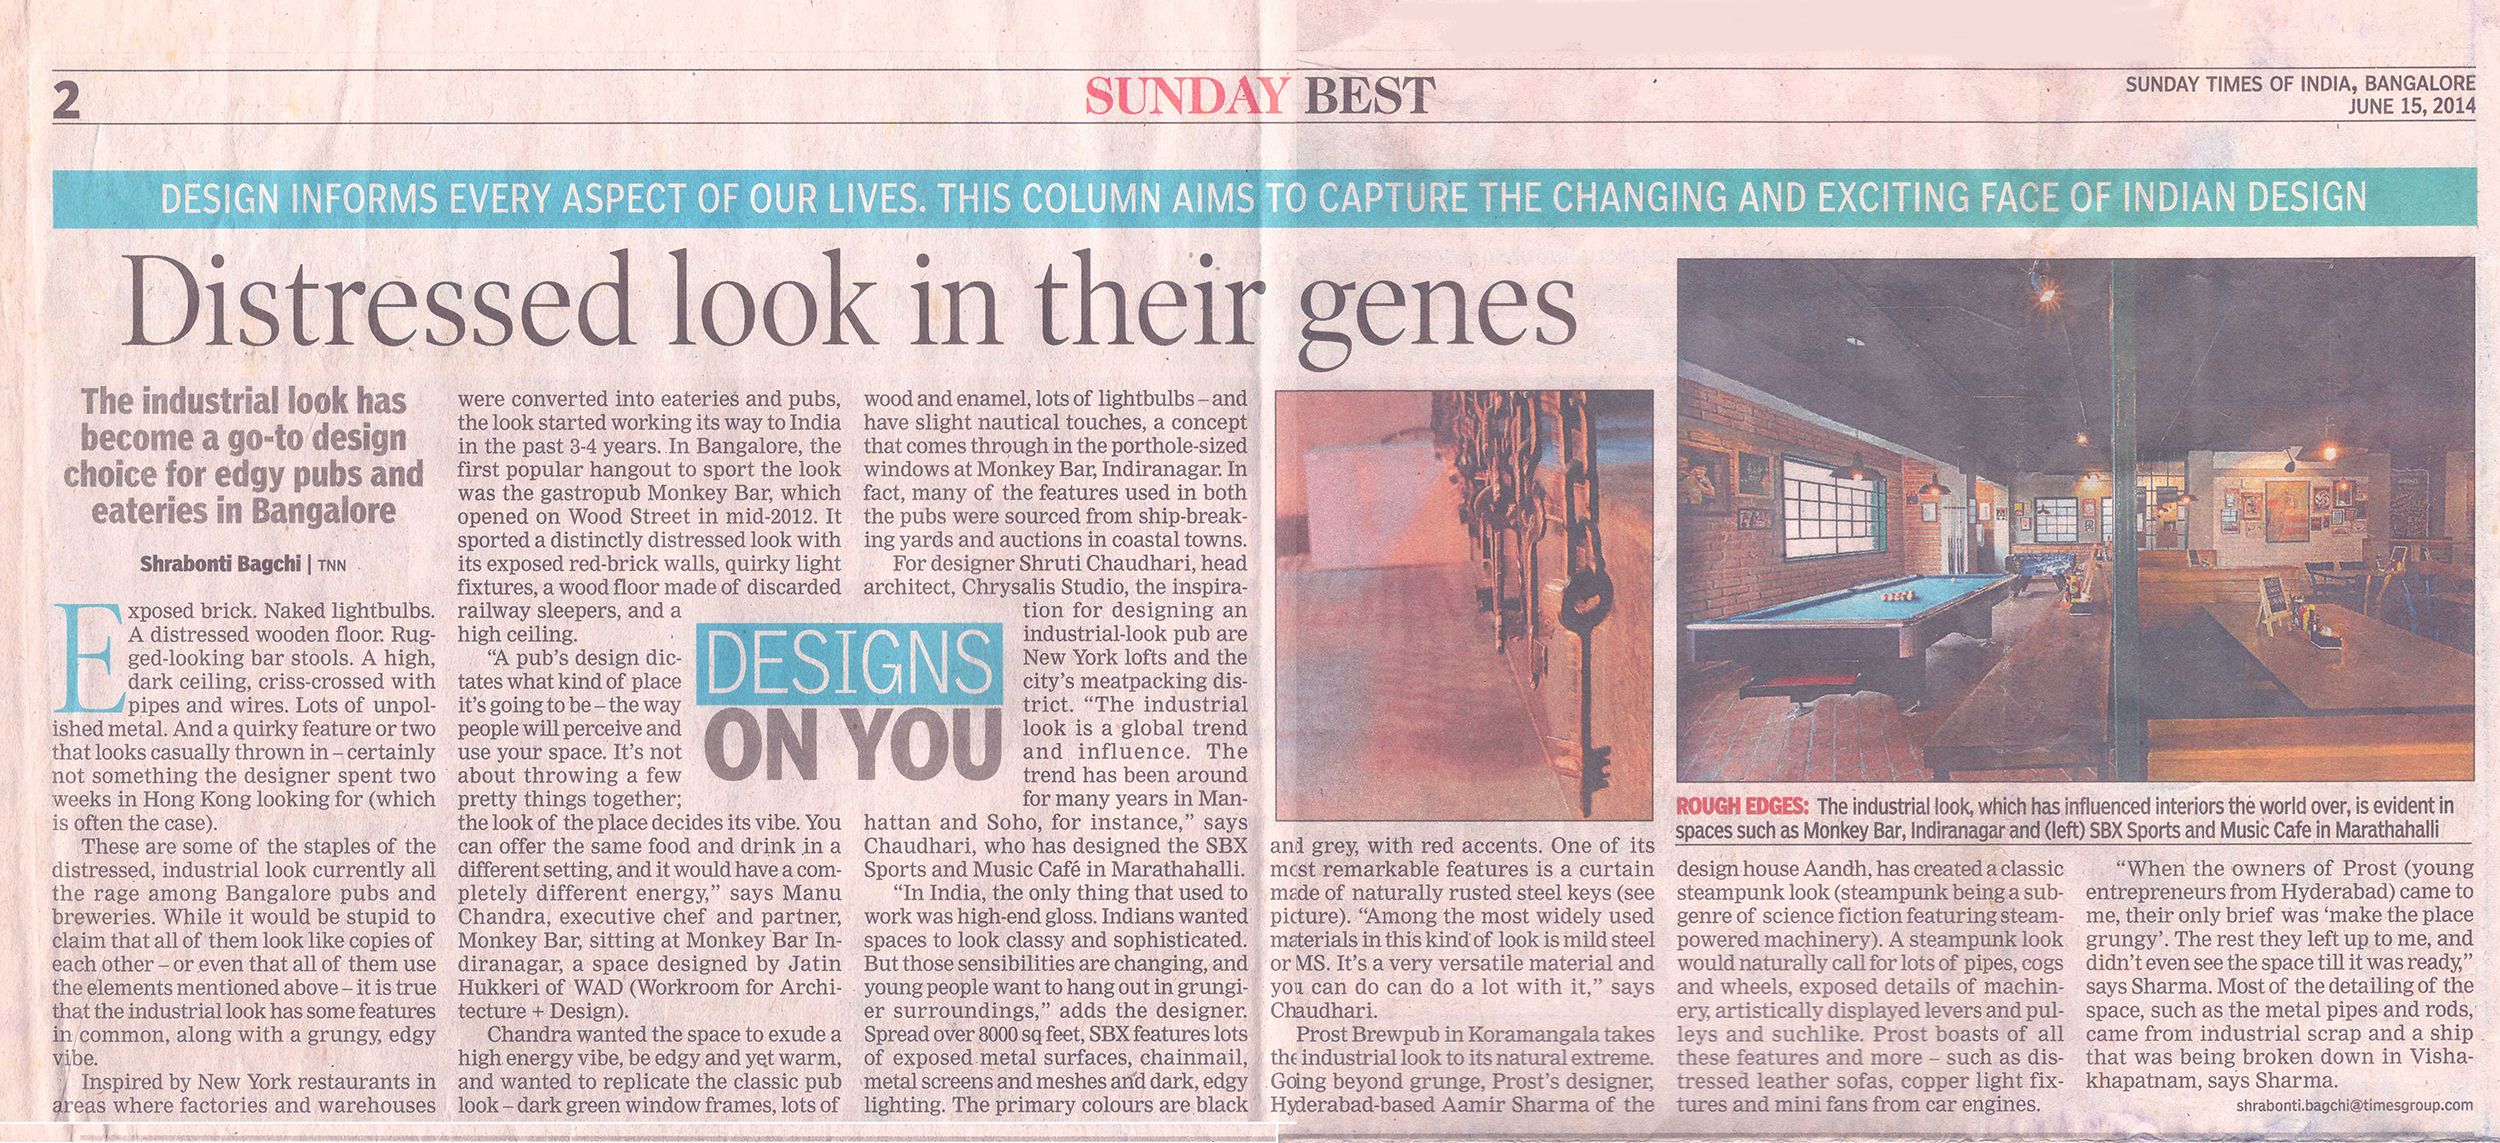 Sunday Times Of India - June 15 2014